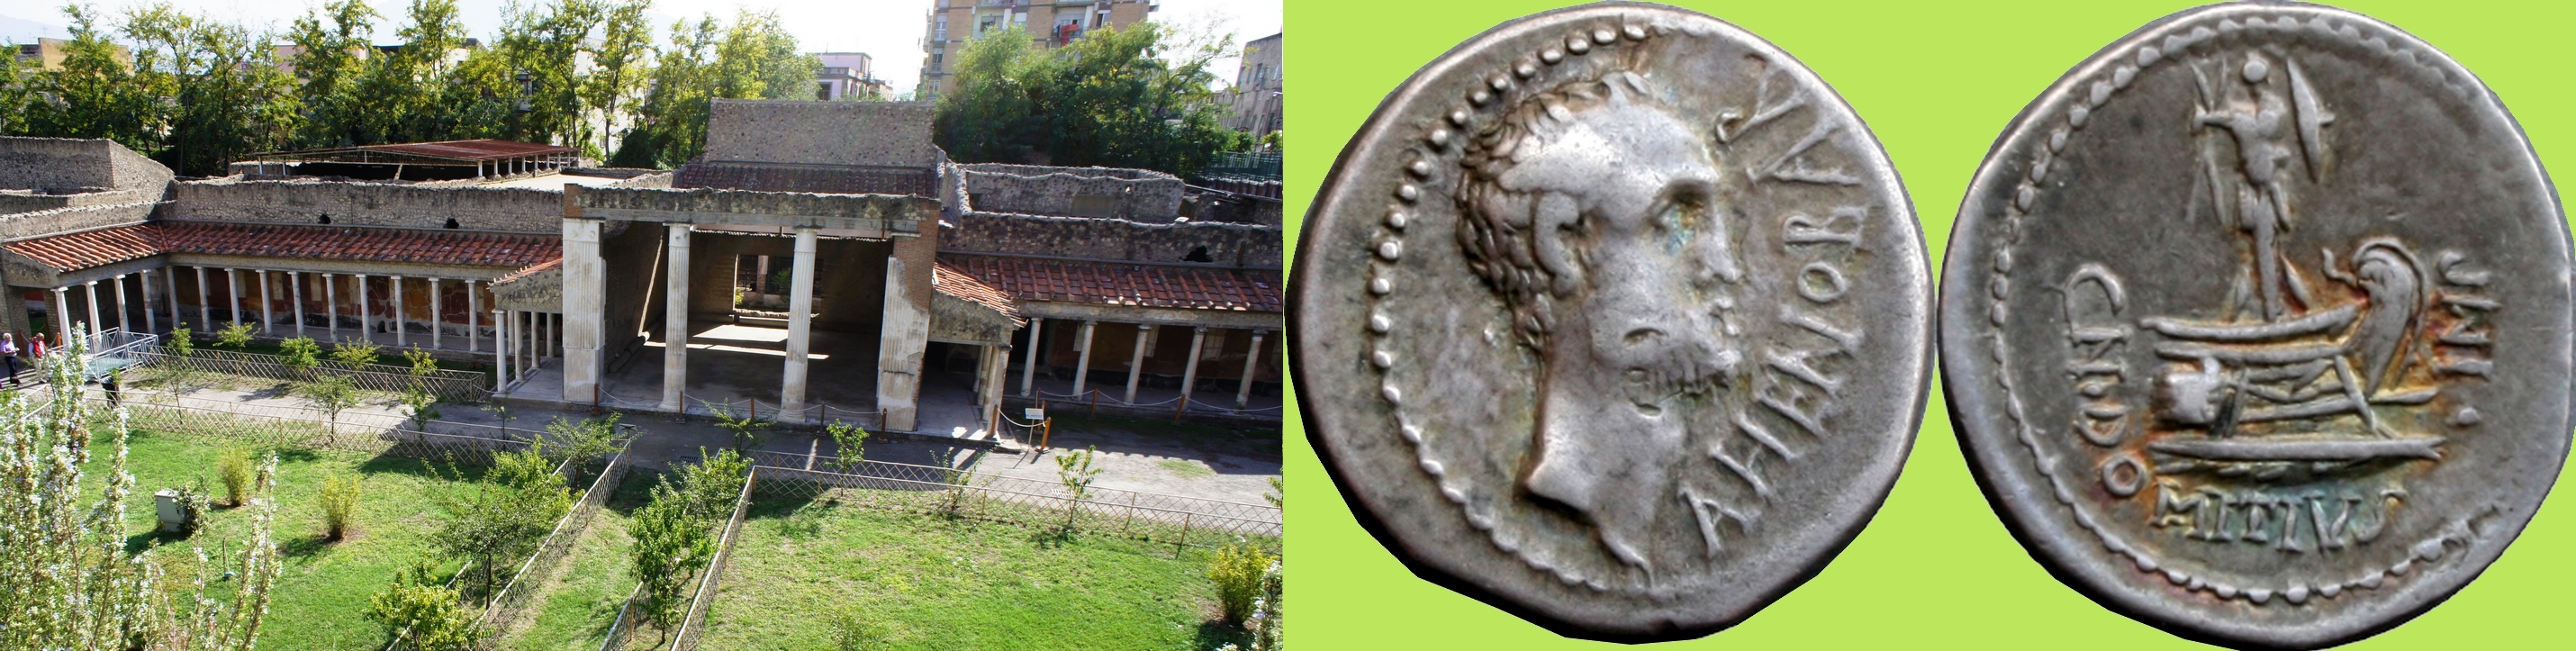 519/2 coin of Domitius Ahenobarbus, Consul 32BC, great-grandfather of the Emperor Nero, alongside the Oplontis Palace of Poppaea, wife of the Emperor Nero